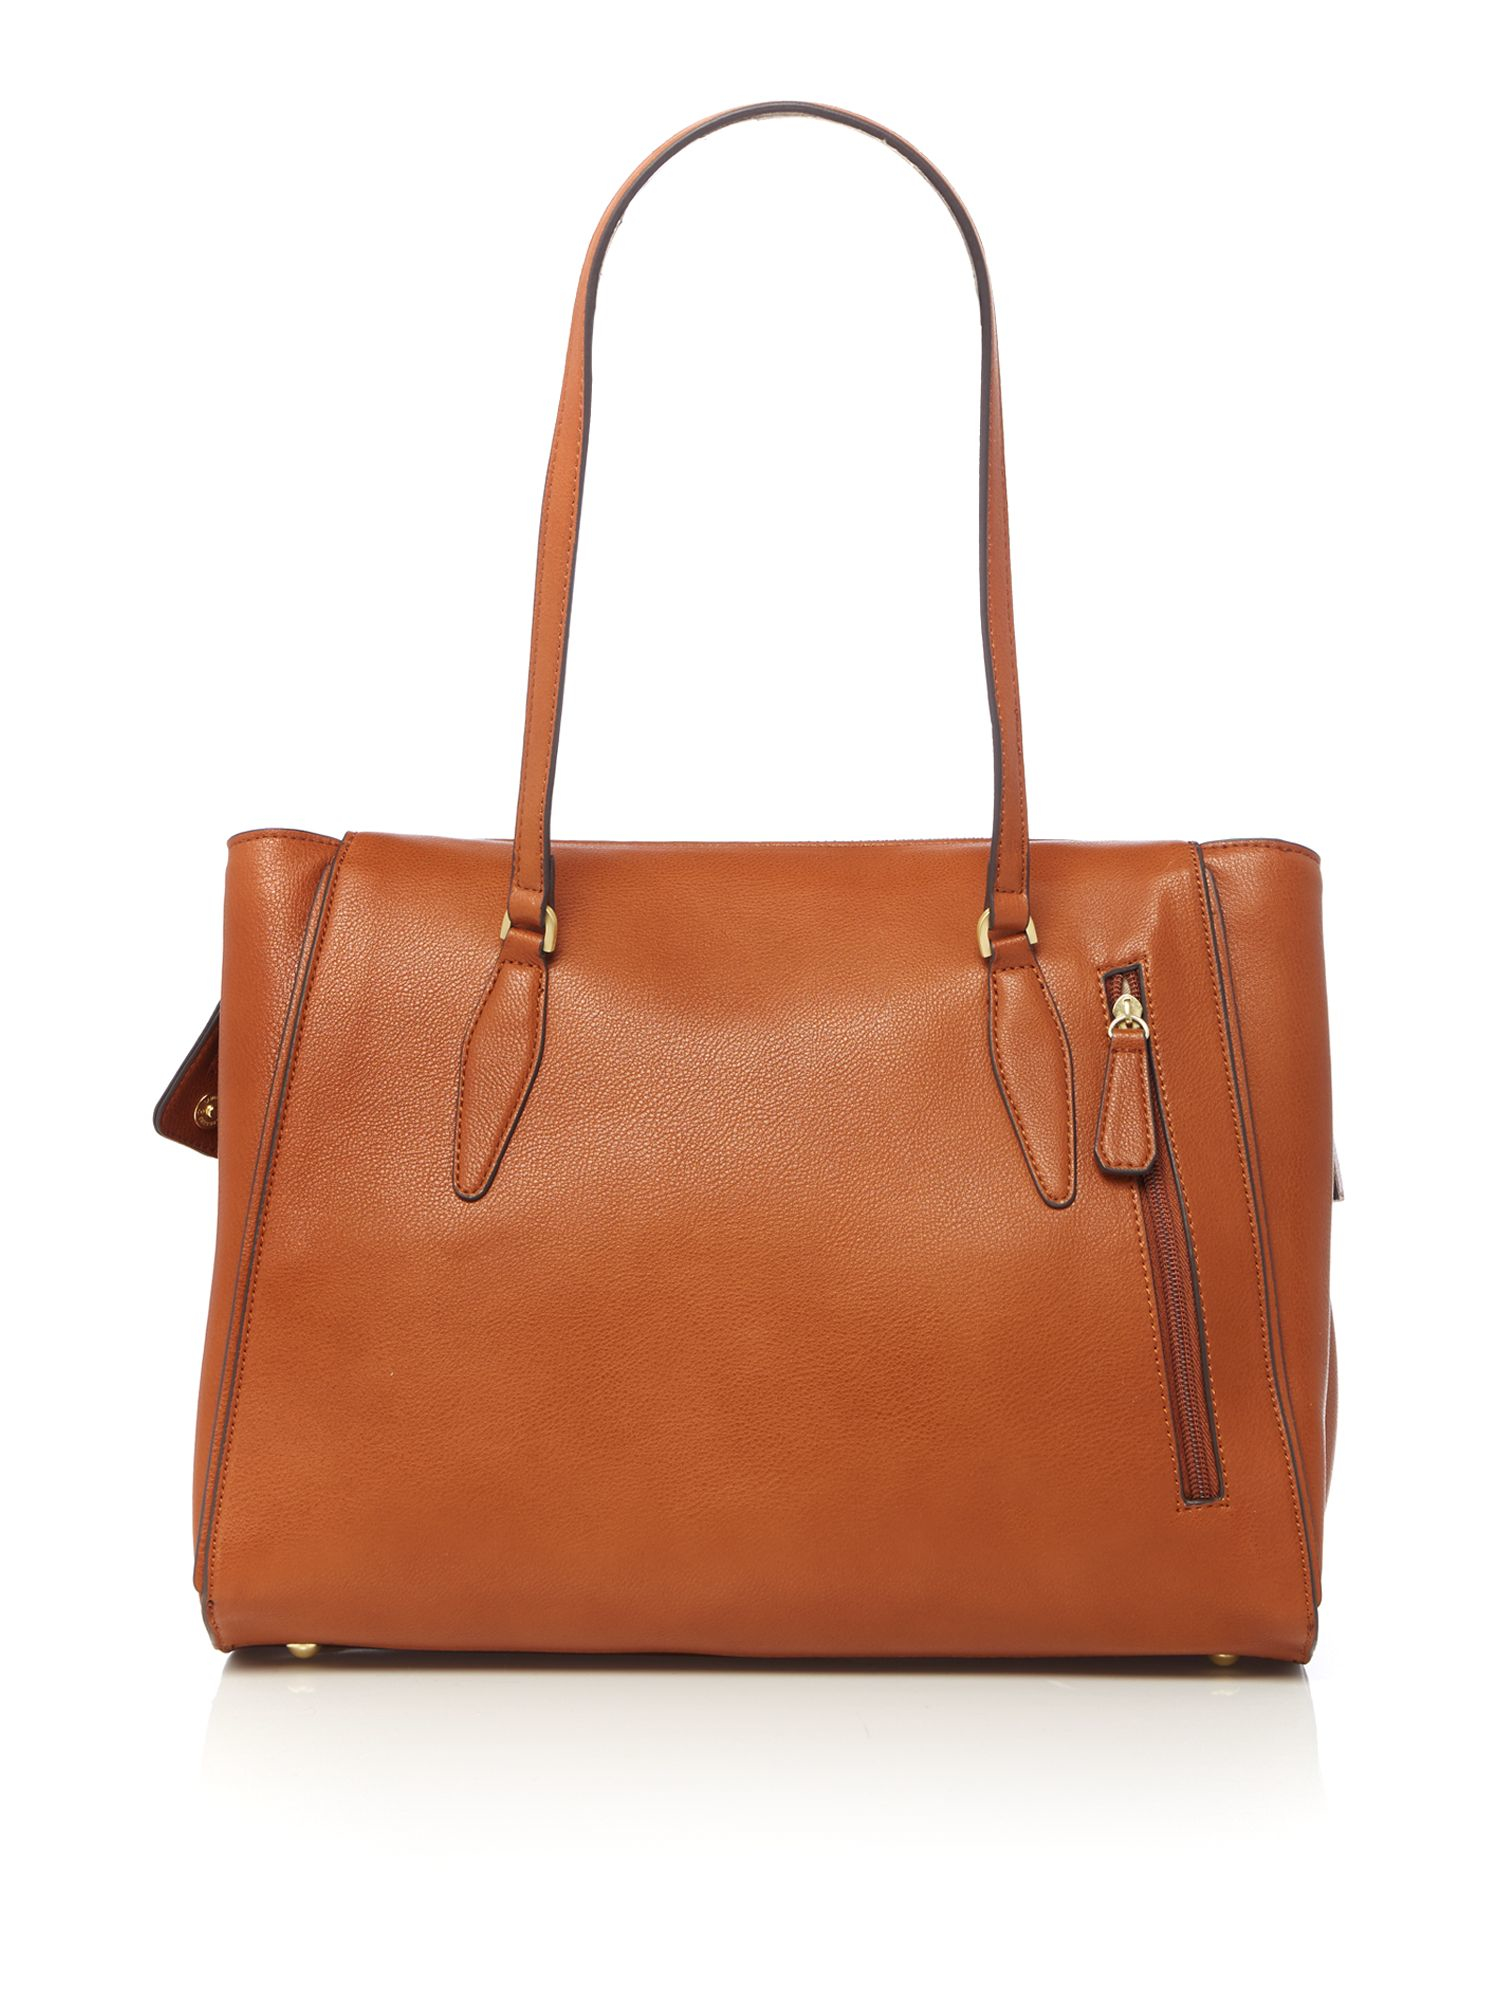 Fiorelli Hennessy Tan Large Shoulder Tote Bag in Brown | Lyst